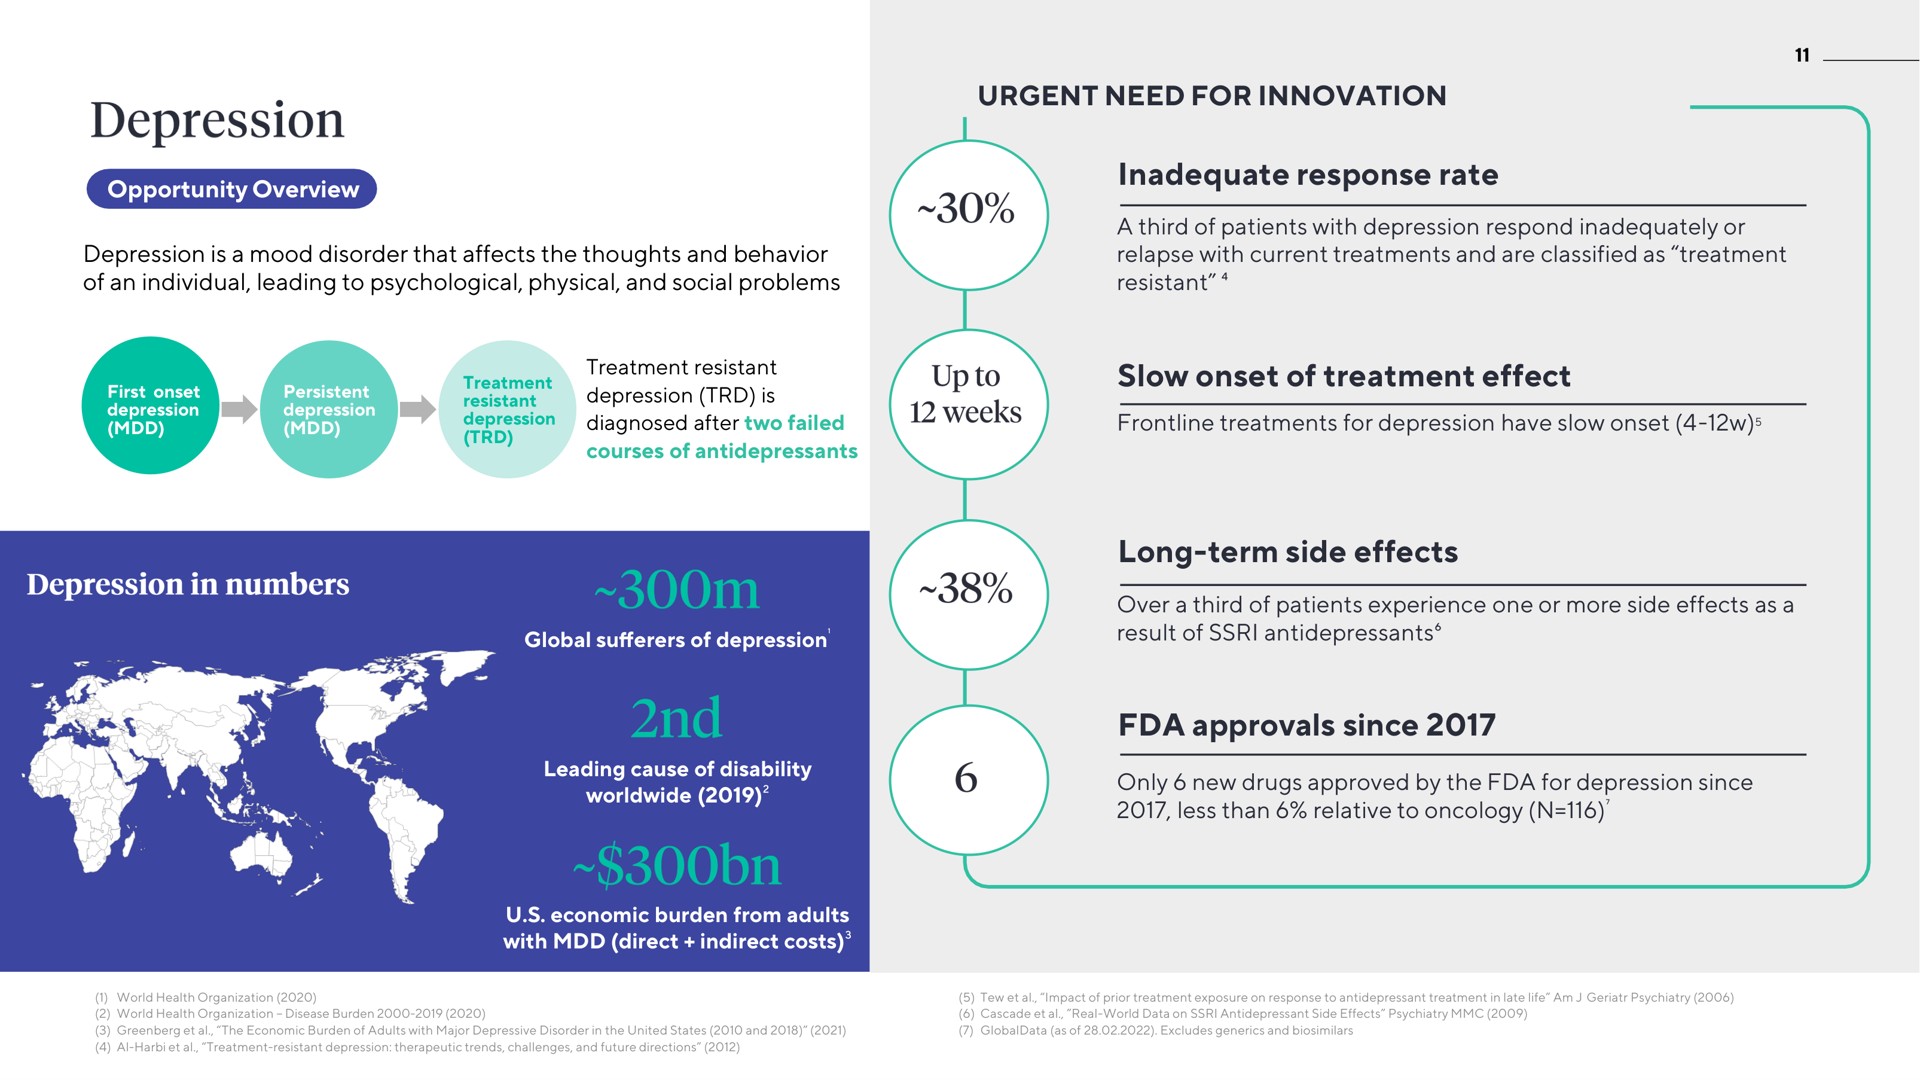 urgent need for innovation inadequate response rate slow onset of treatment effect long term side effects approvals since depression | ATAI